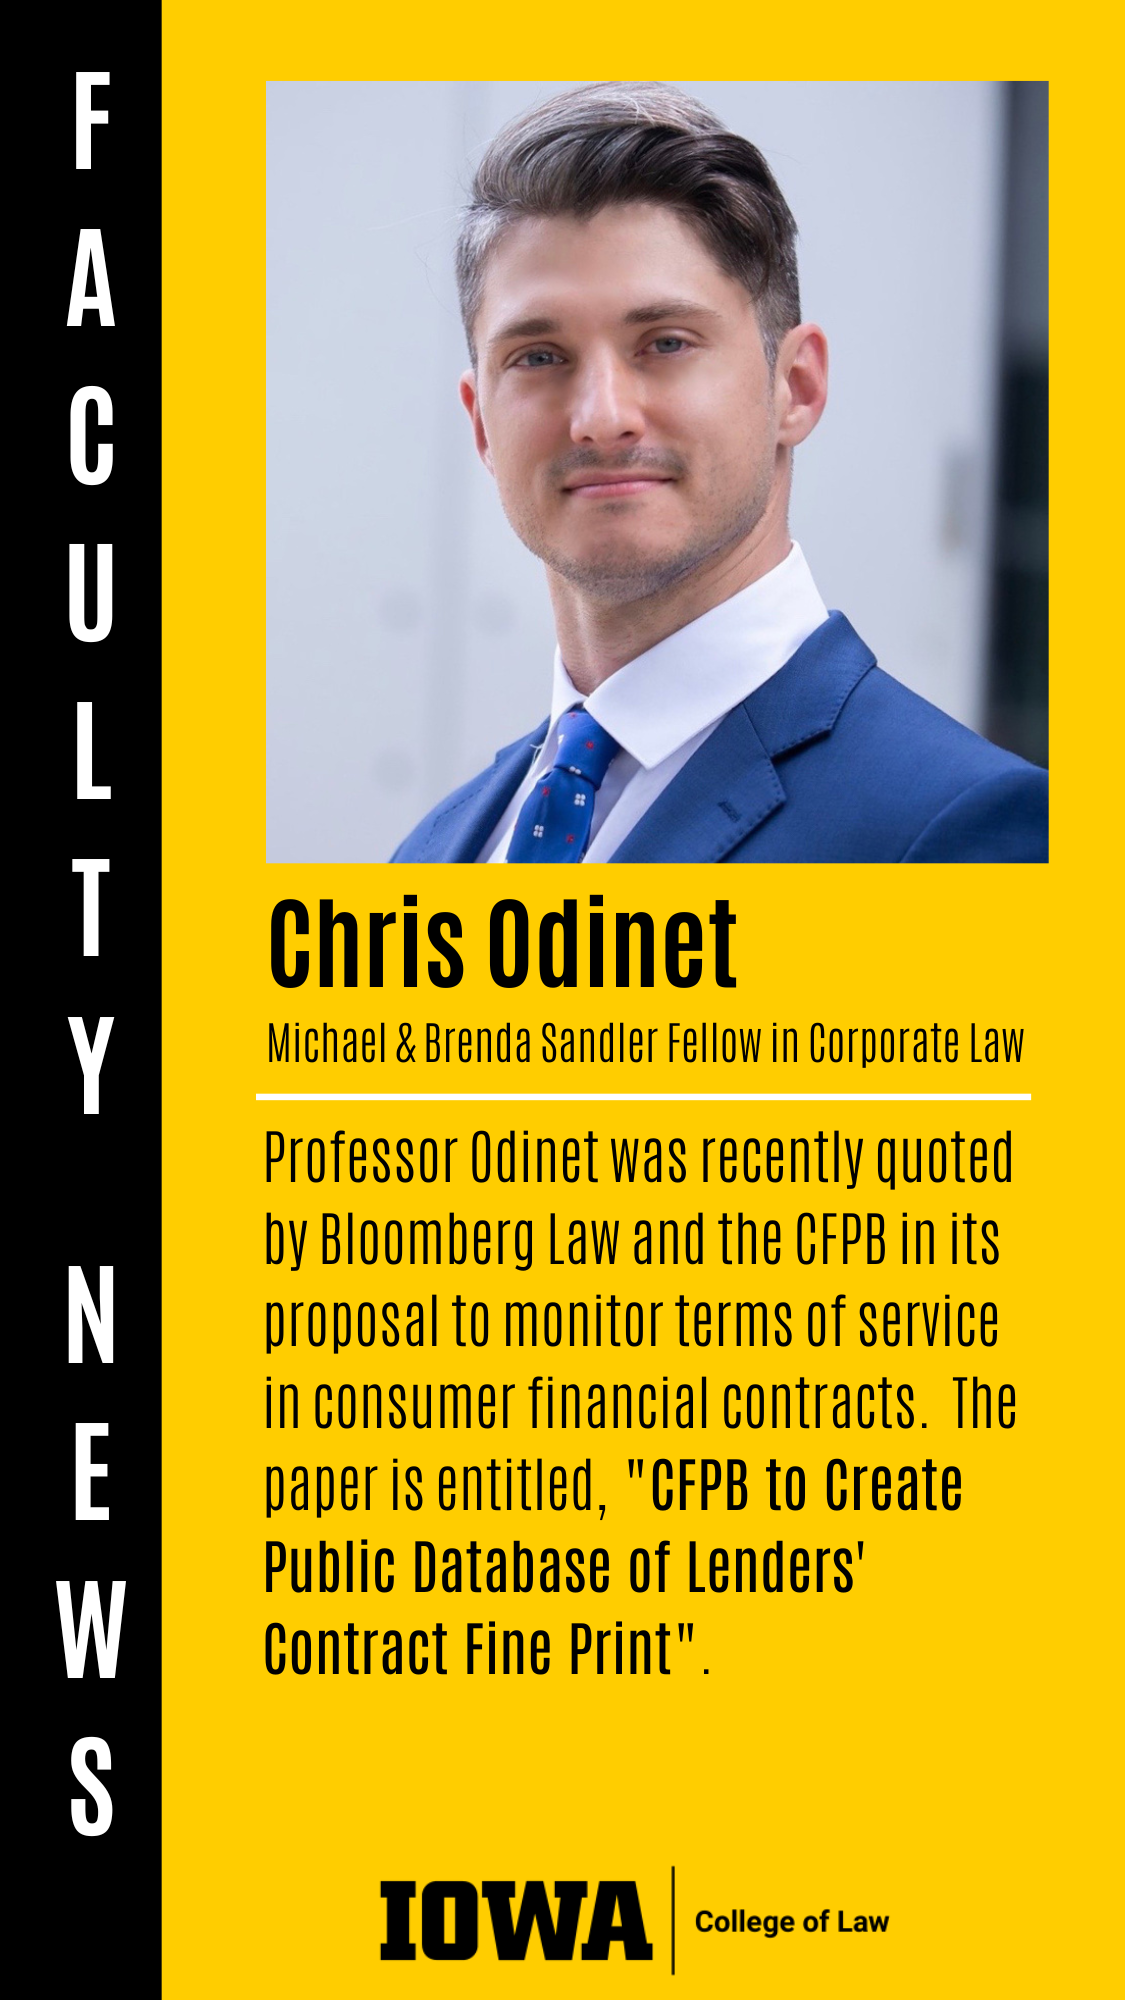 Faculty News - Chris Odinet (Michael & Brenda Sandler Fellow in Corporate Law): Professor Odinet was recently quoted by Bloomberg Law and the CFPB in its proposal to monitor terms of service in consumer financial contracts.  The paper is entitled, "CFPB to Create Public Database of Lenders' Contract Fine Print".